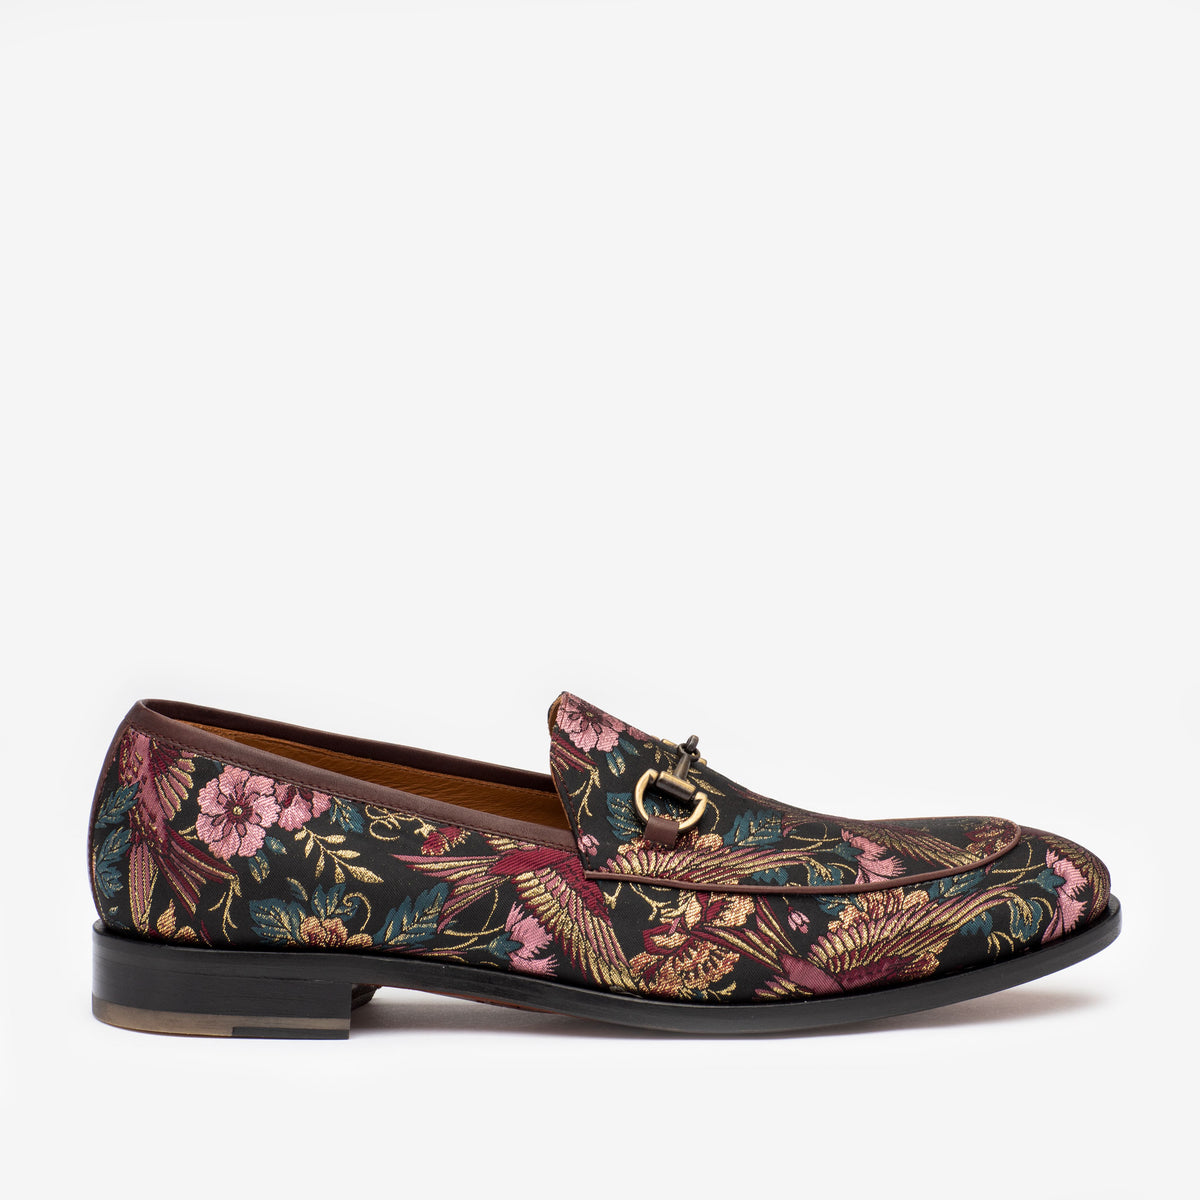 The Russell Loafer in Paradise